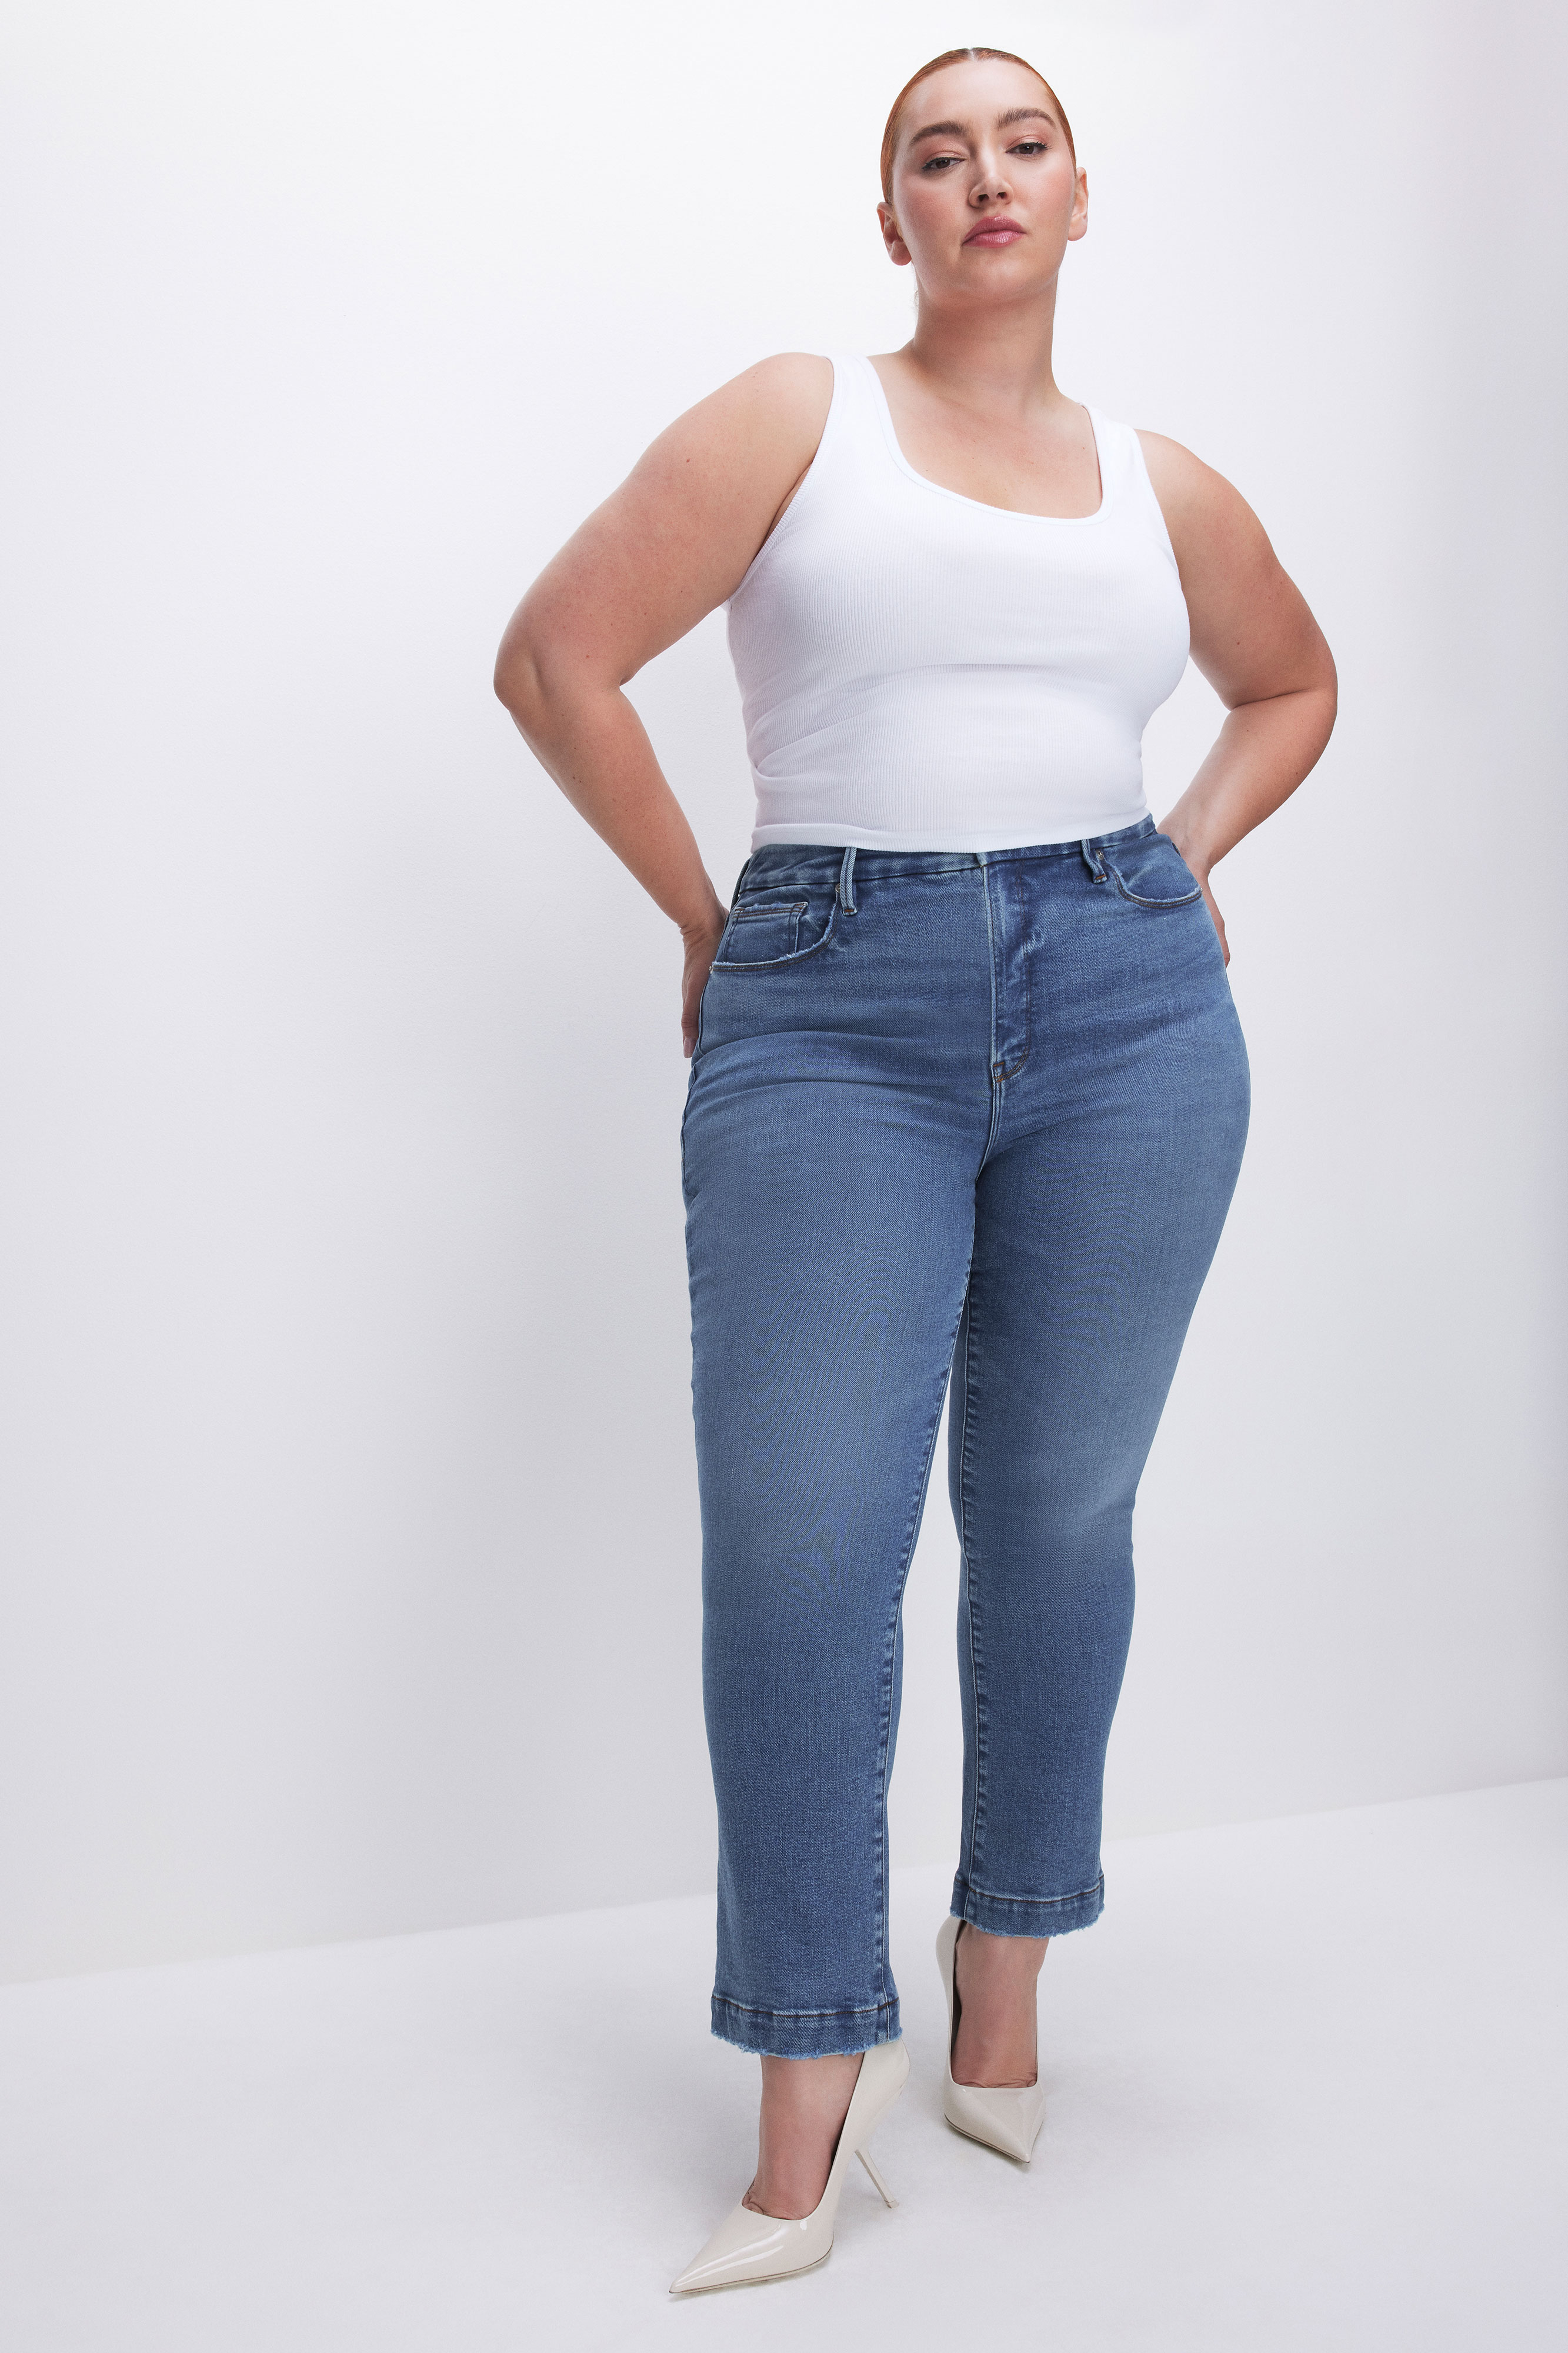 Styled with GOOD LEGS STRAIGHT LIGHT COMPRESSION JEANS | INDIGO569